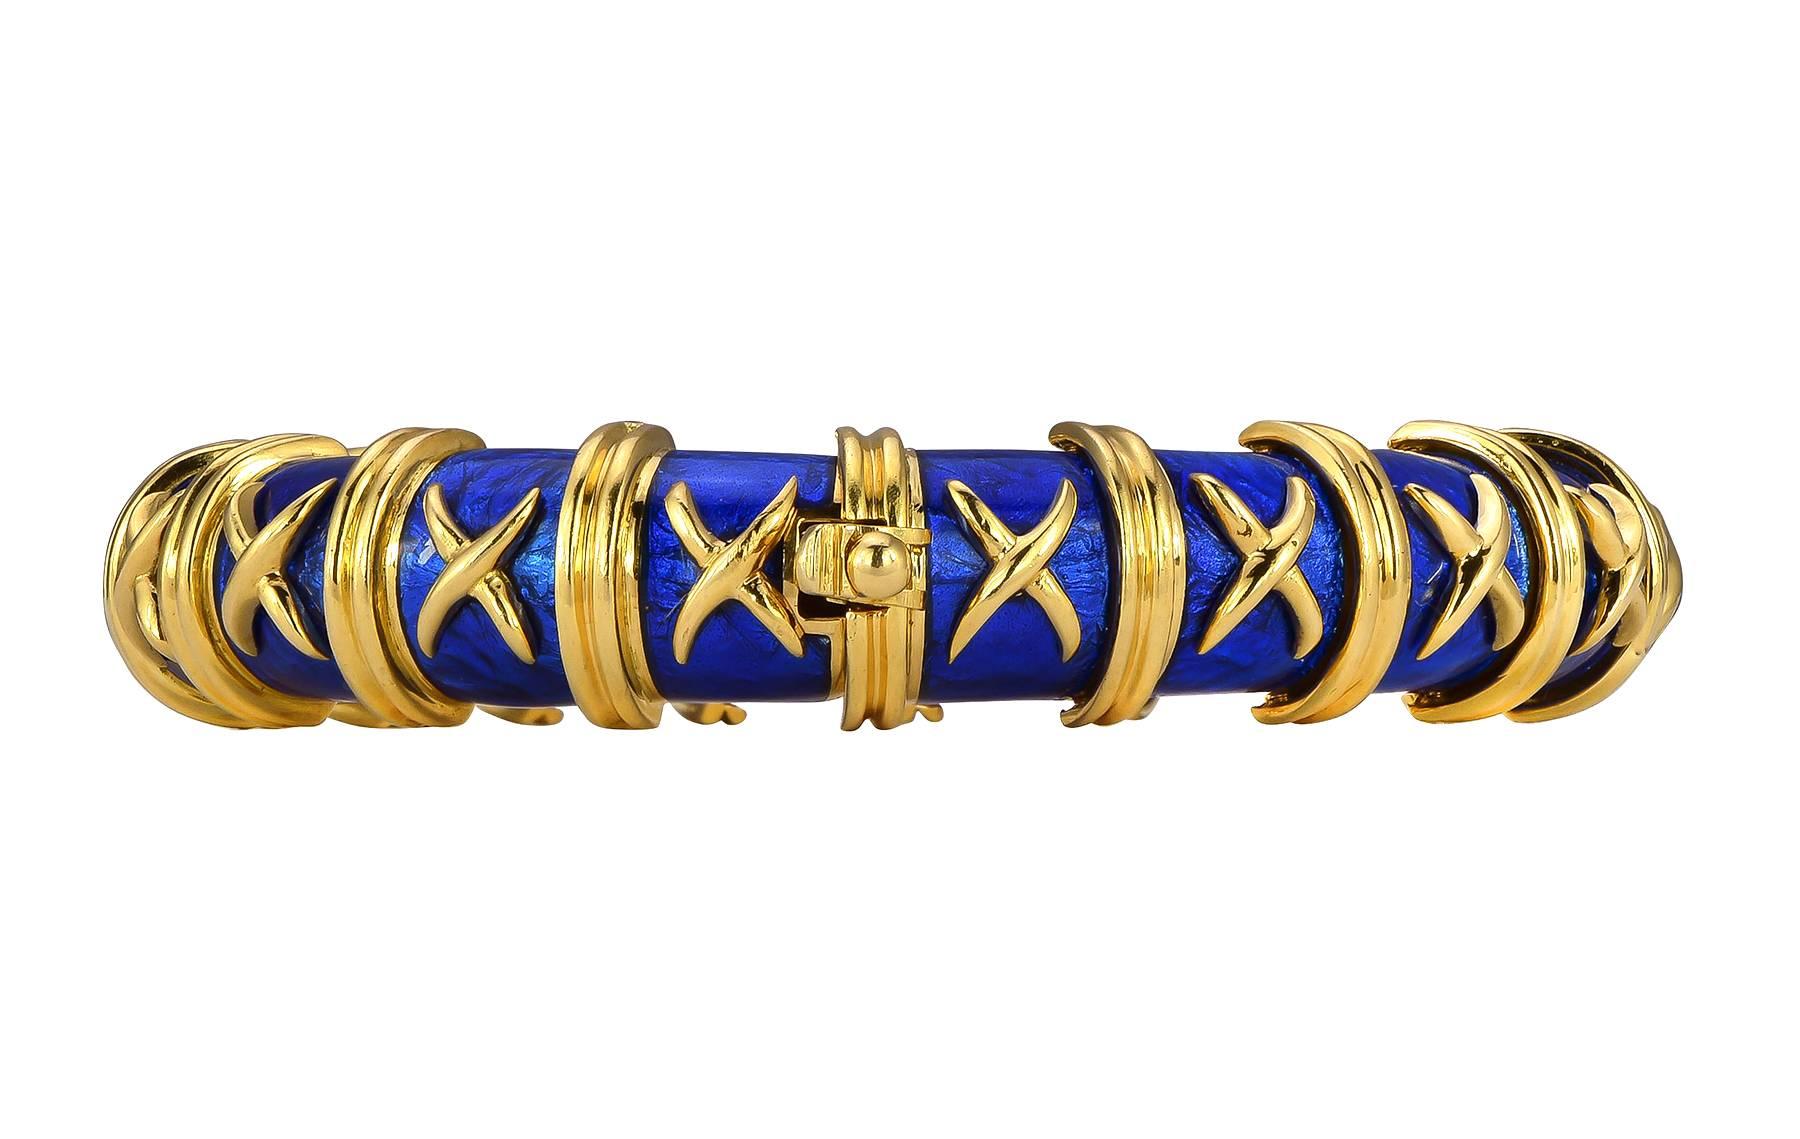 Tiffany & Co. Schlumburger bangle, crafted in 18k yellow gold and enrich with electric blue enamel, accented with gold X’s and double piped borders surrounding the entire bracelet. The bracelet measures one half inch in width and four tenths of an